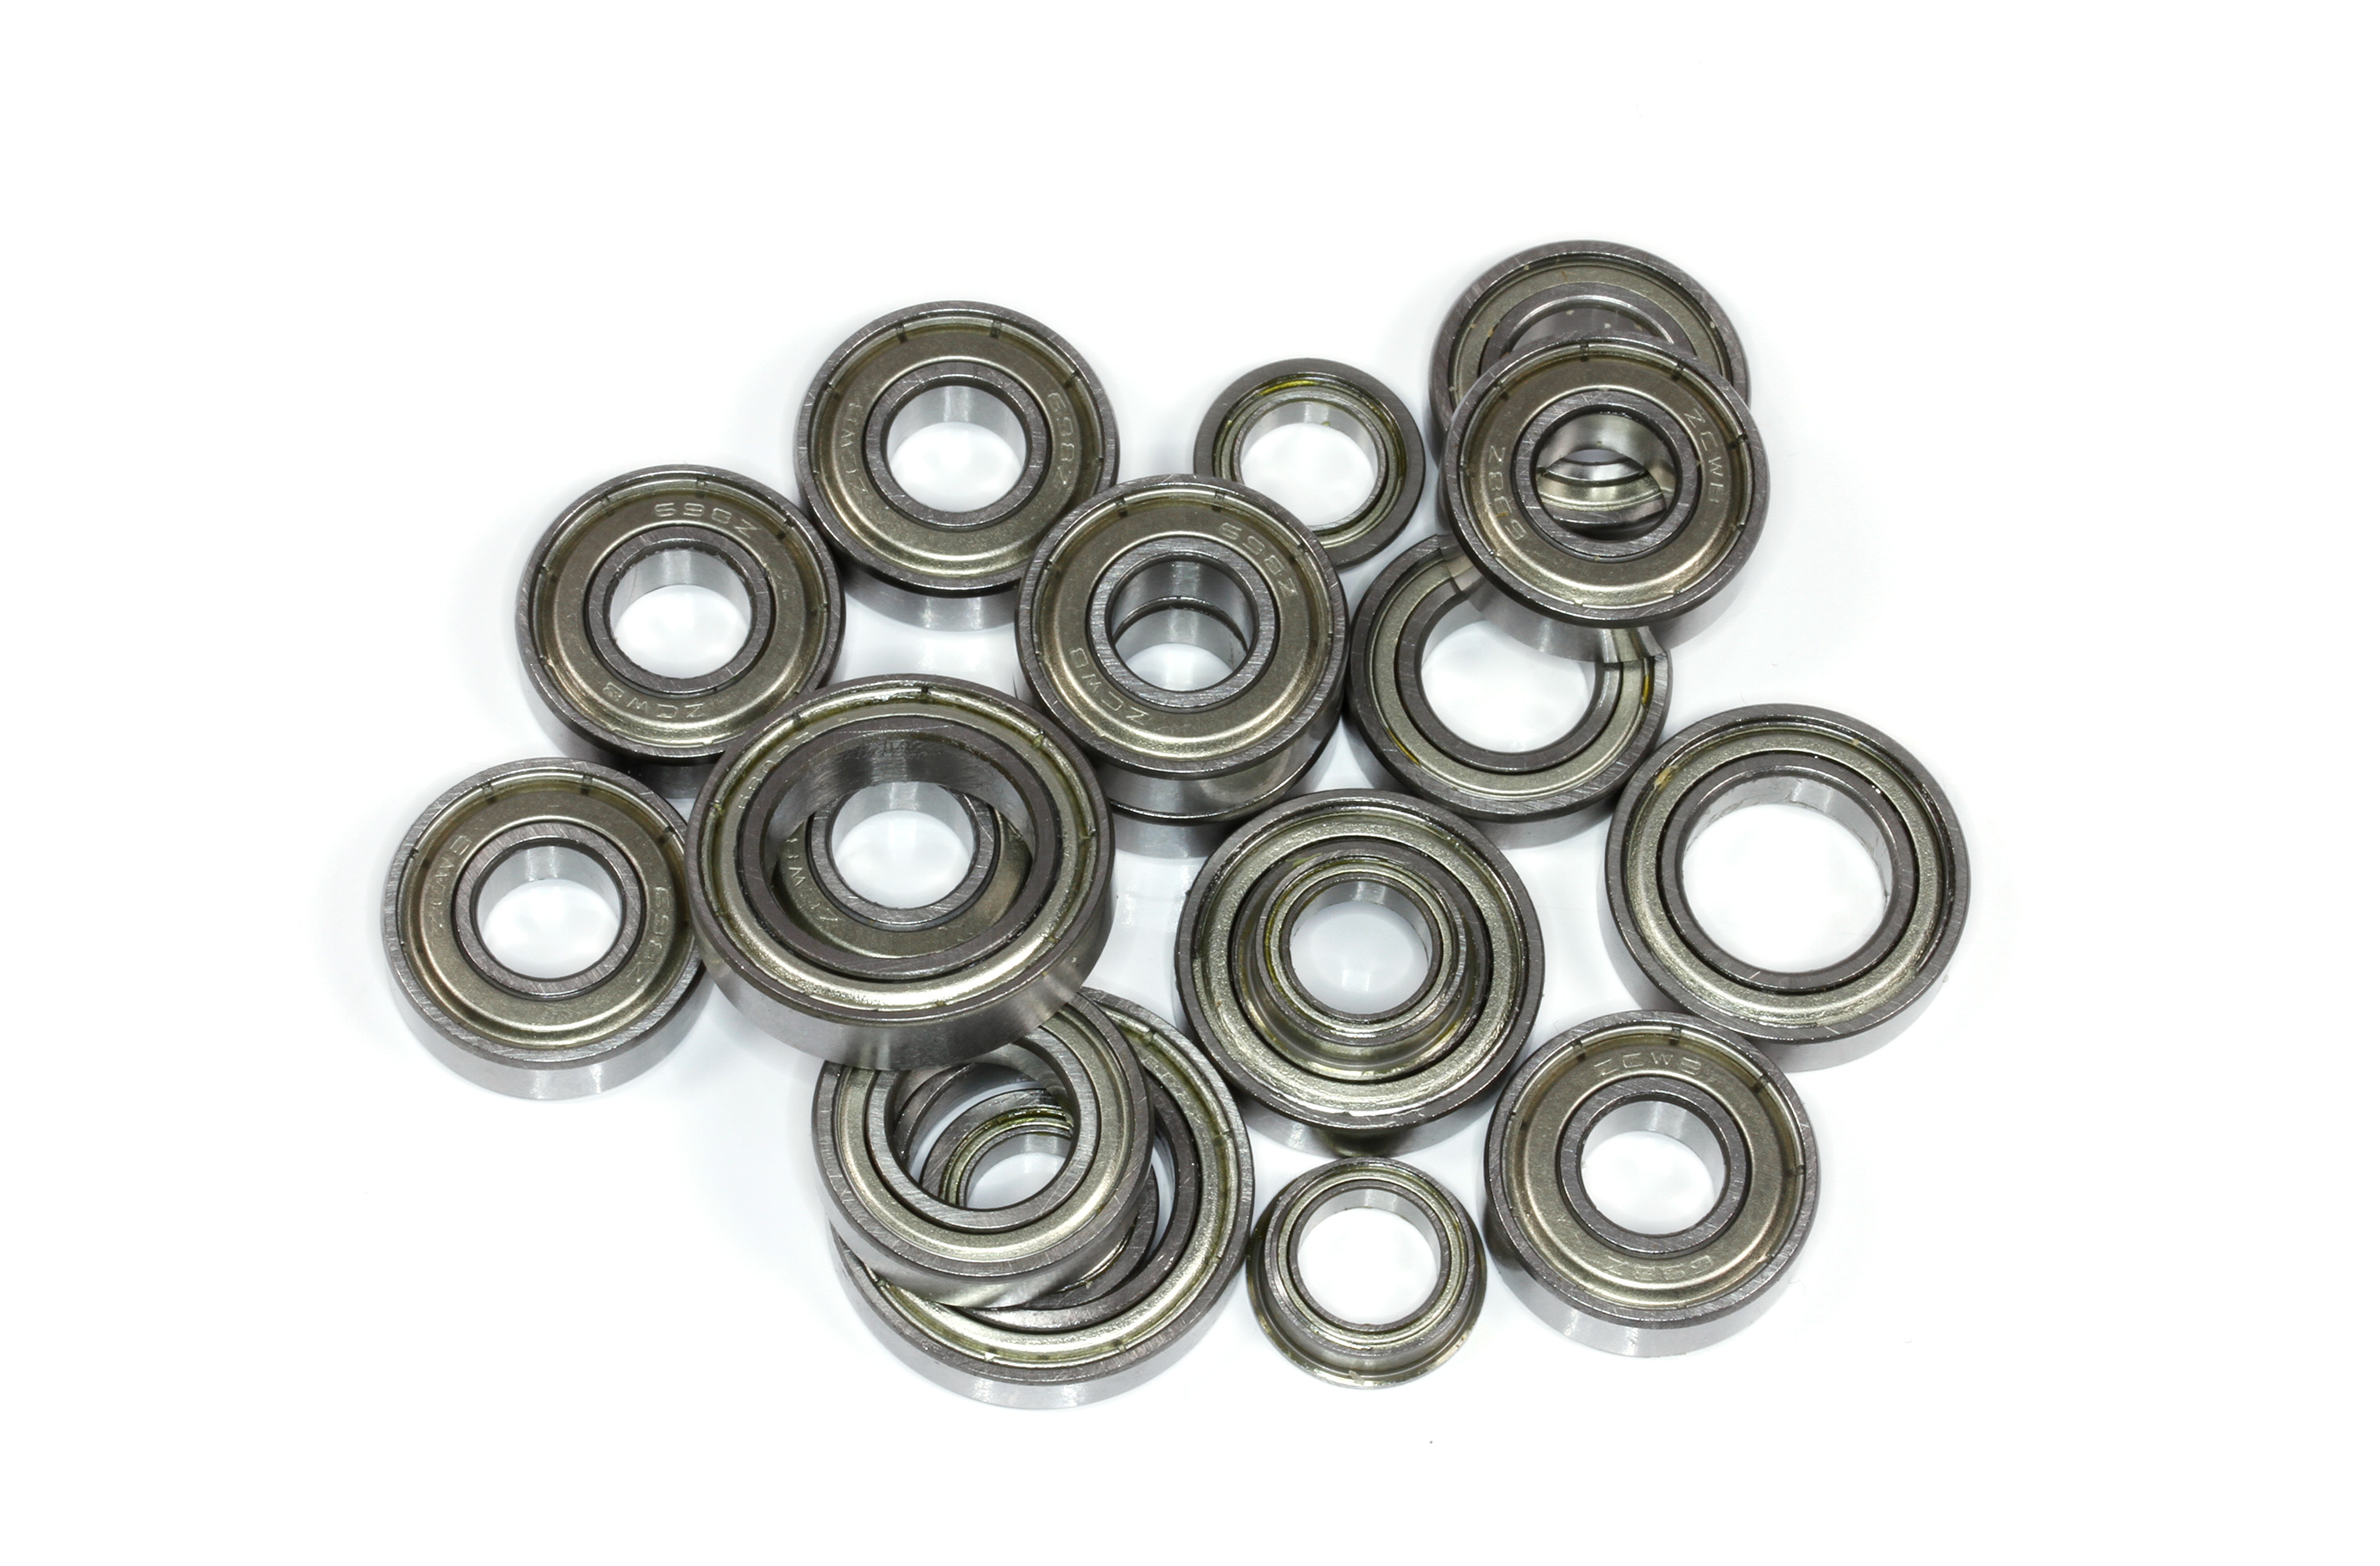 y2012-01 Complete Ball bearing set for FW01